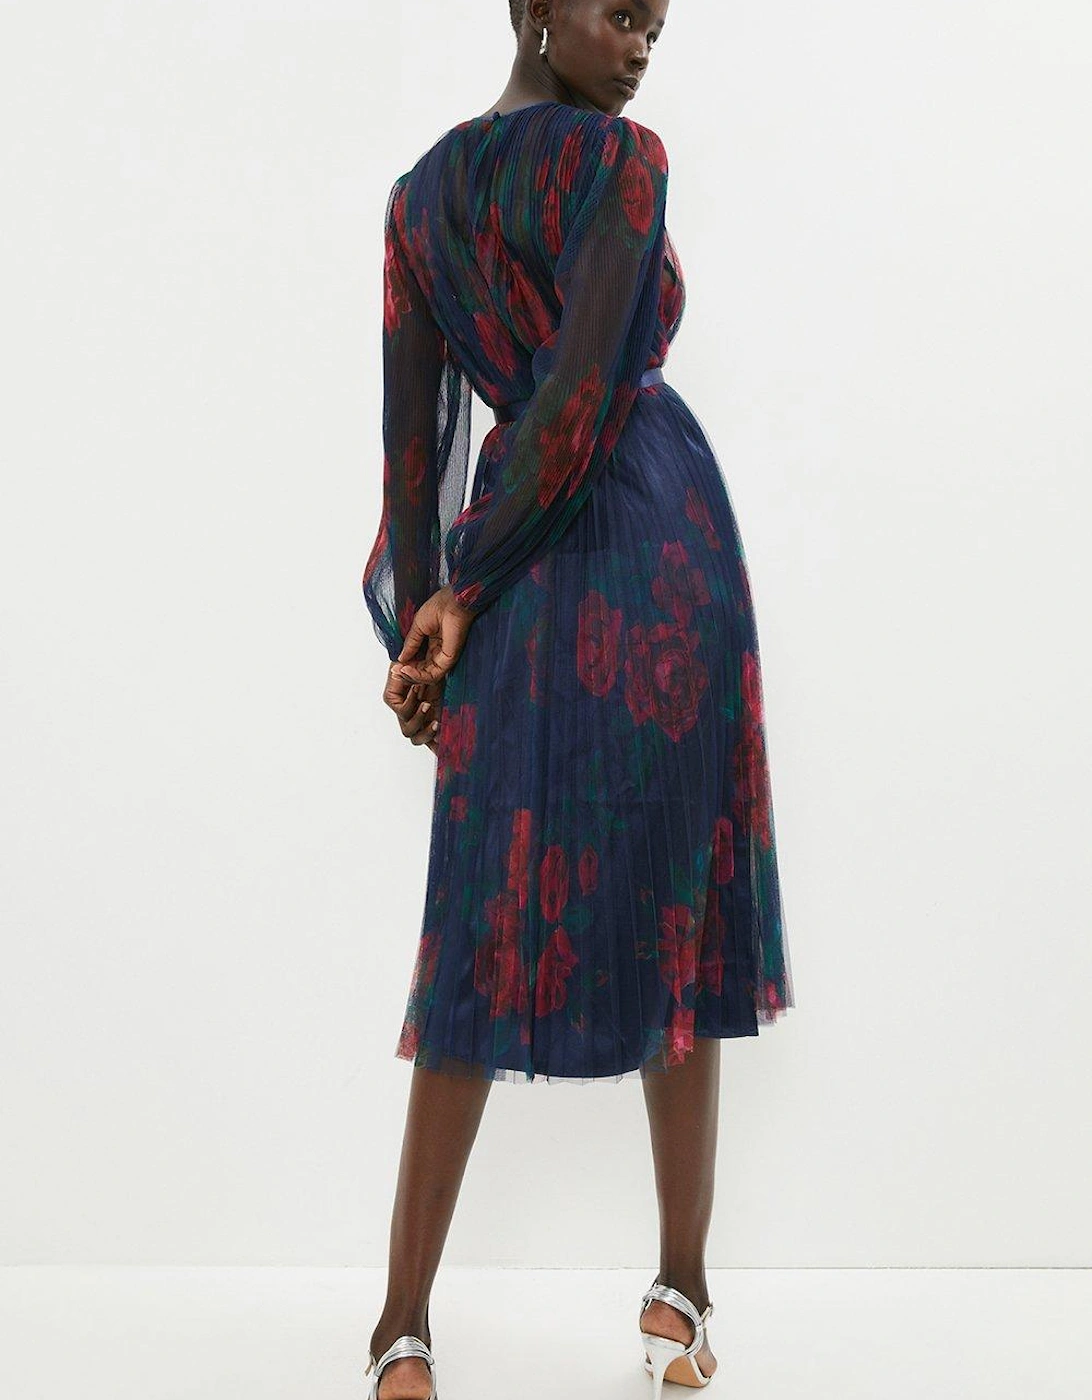 Mesh Printed Dress With Pleated Skirt